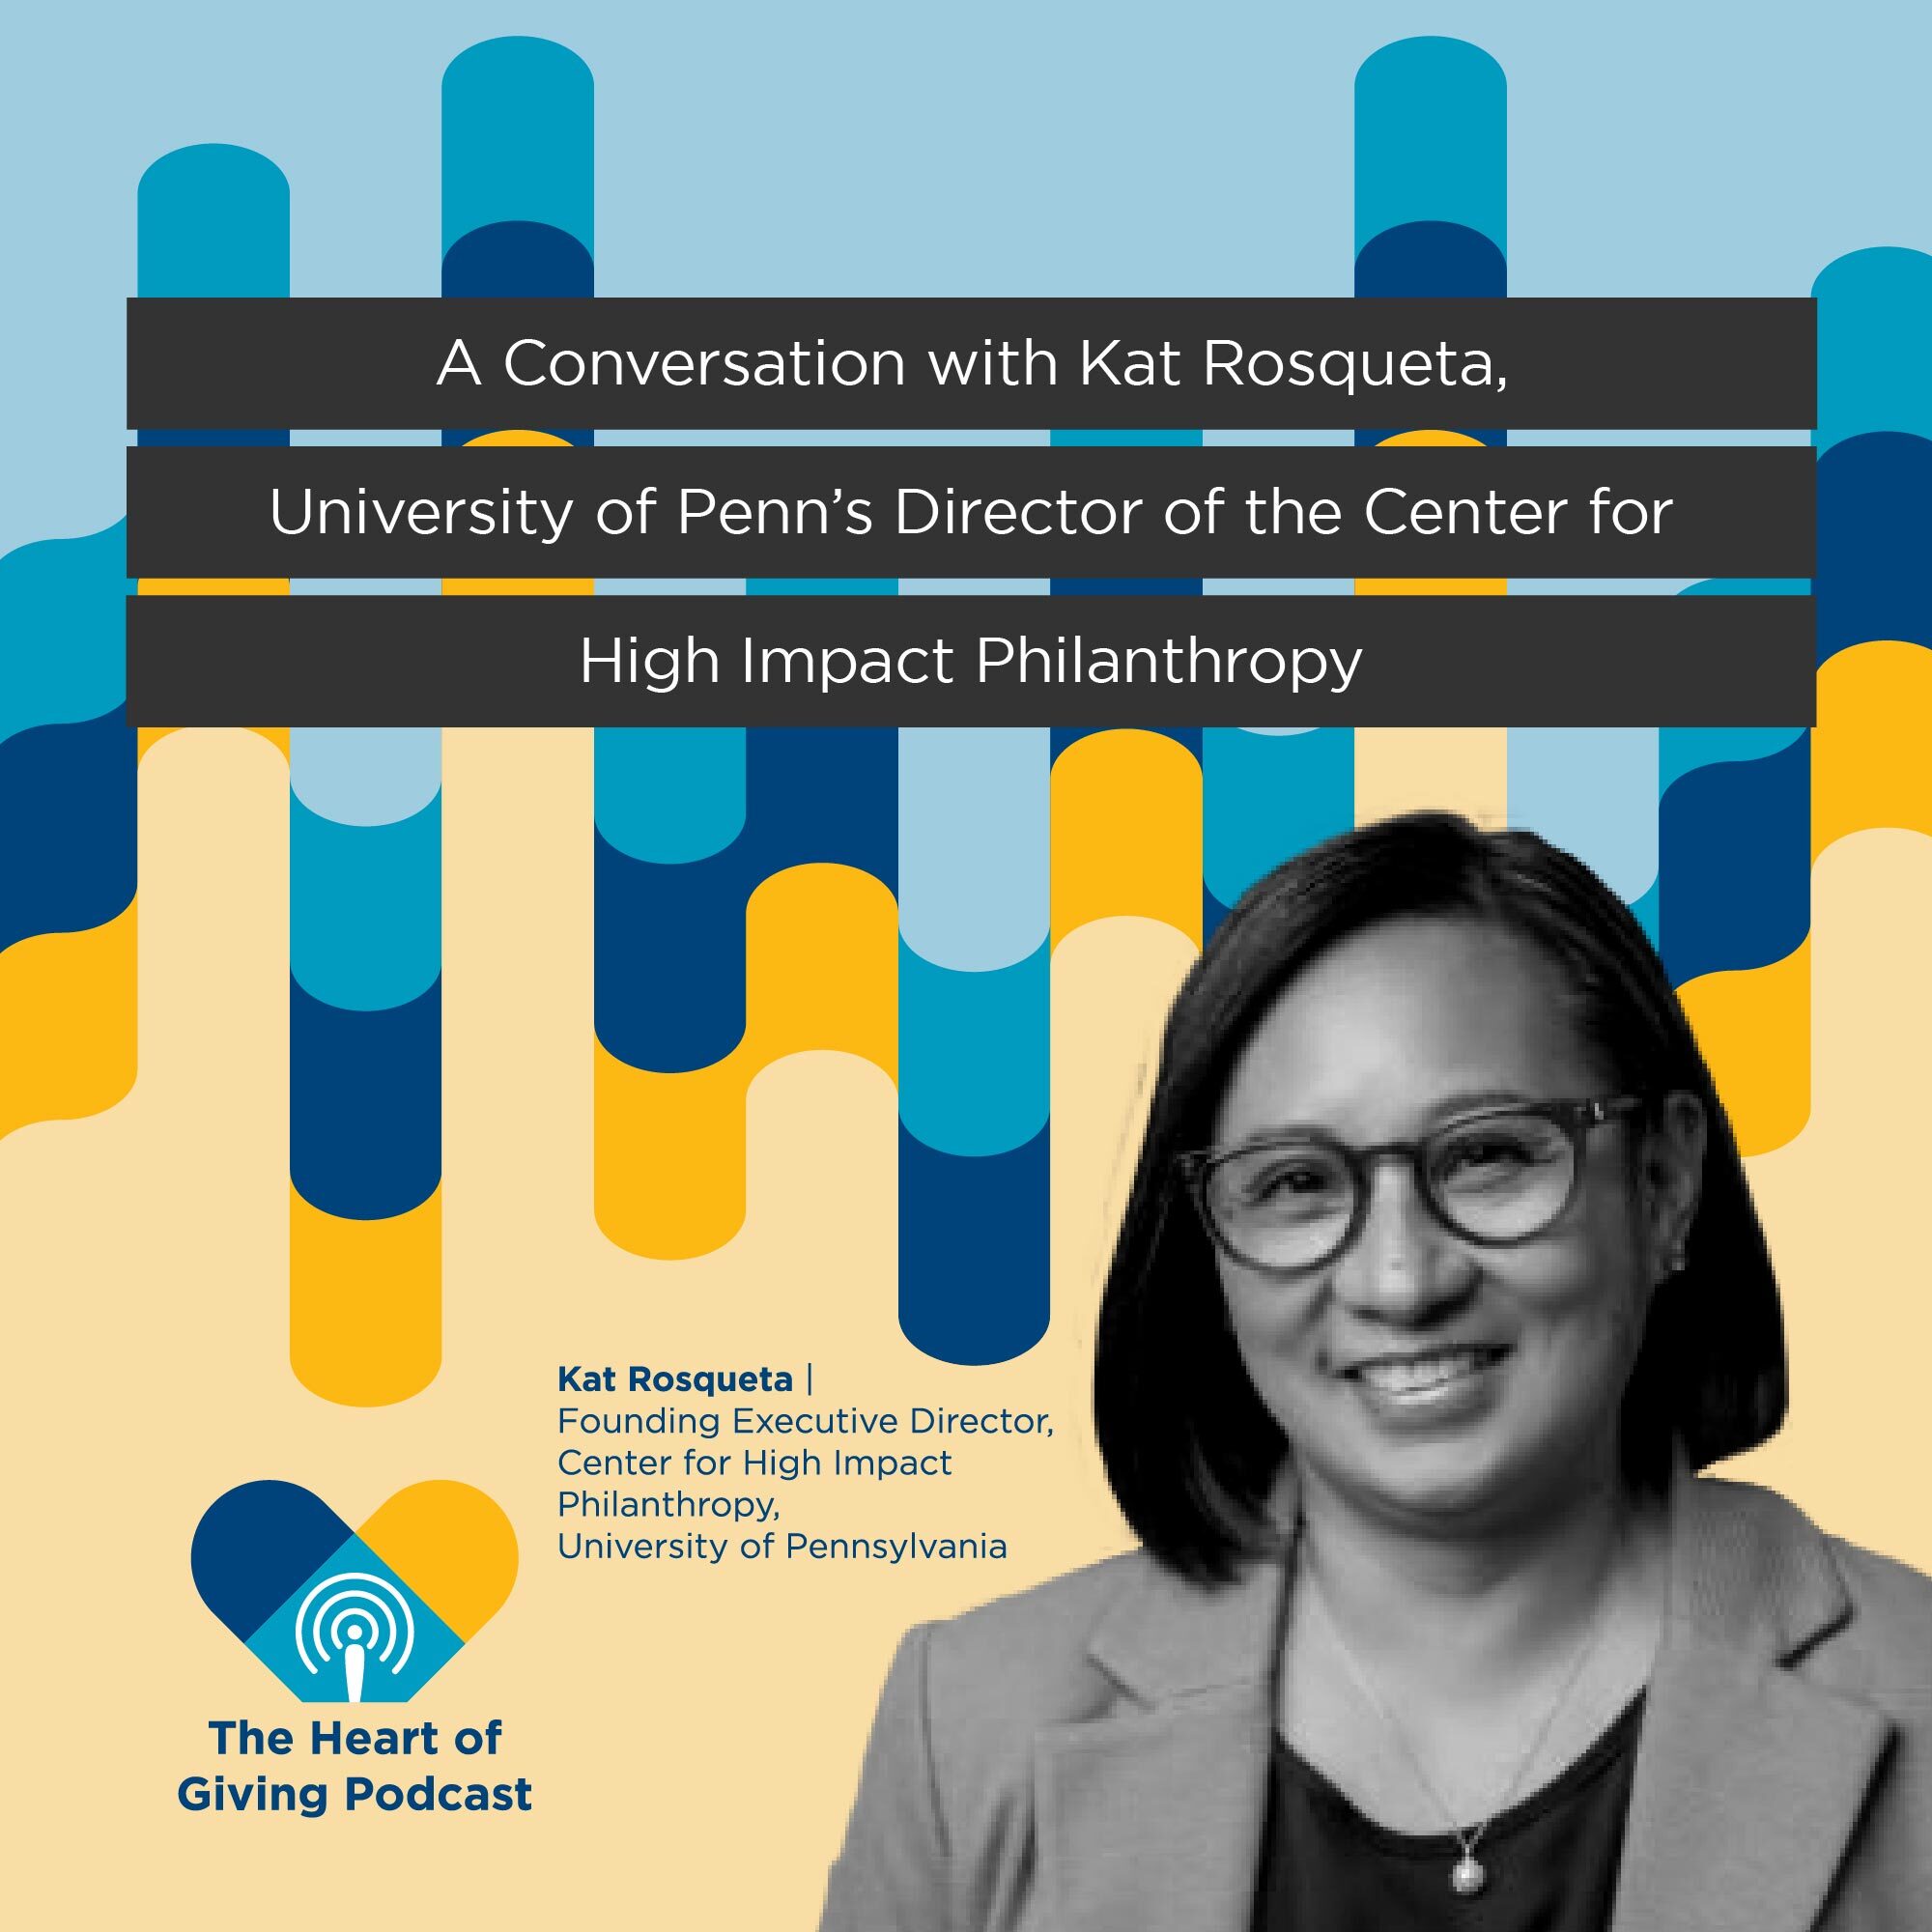 A conversation with Kat Rosqueta, University of Penn’s Director of the Center for High Impact Philanthropy